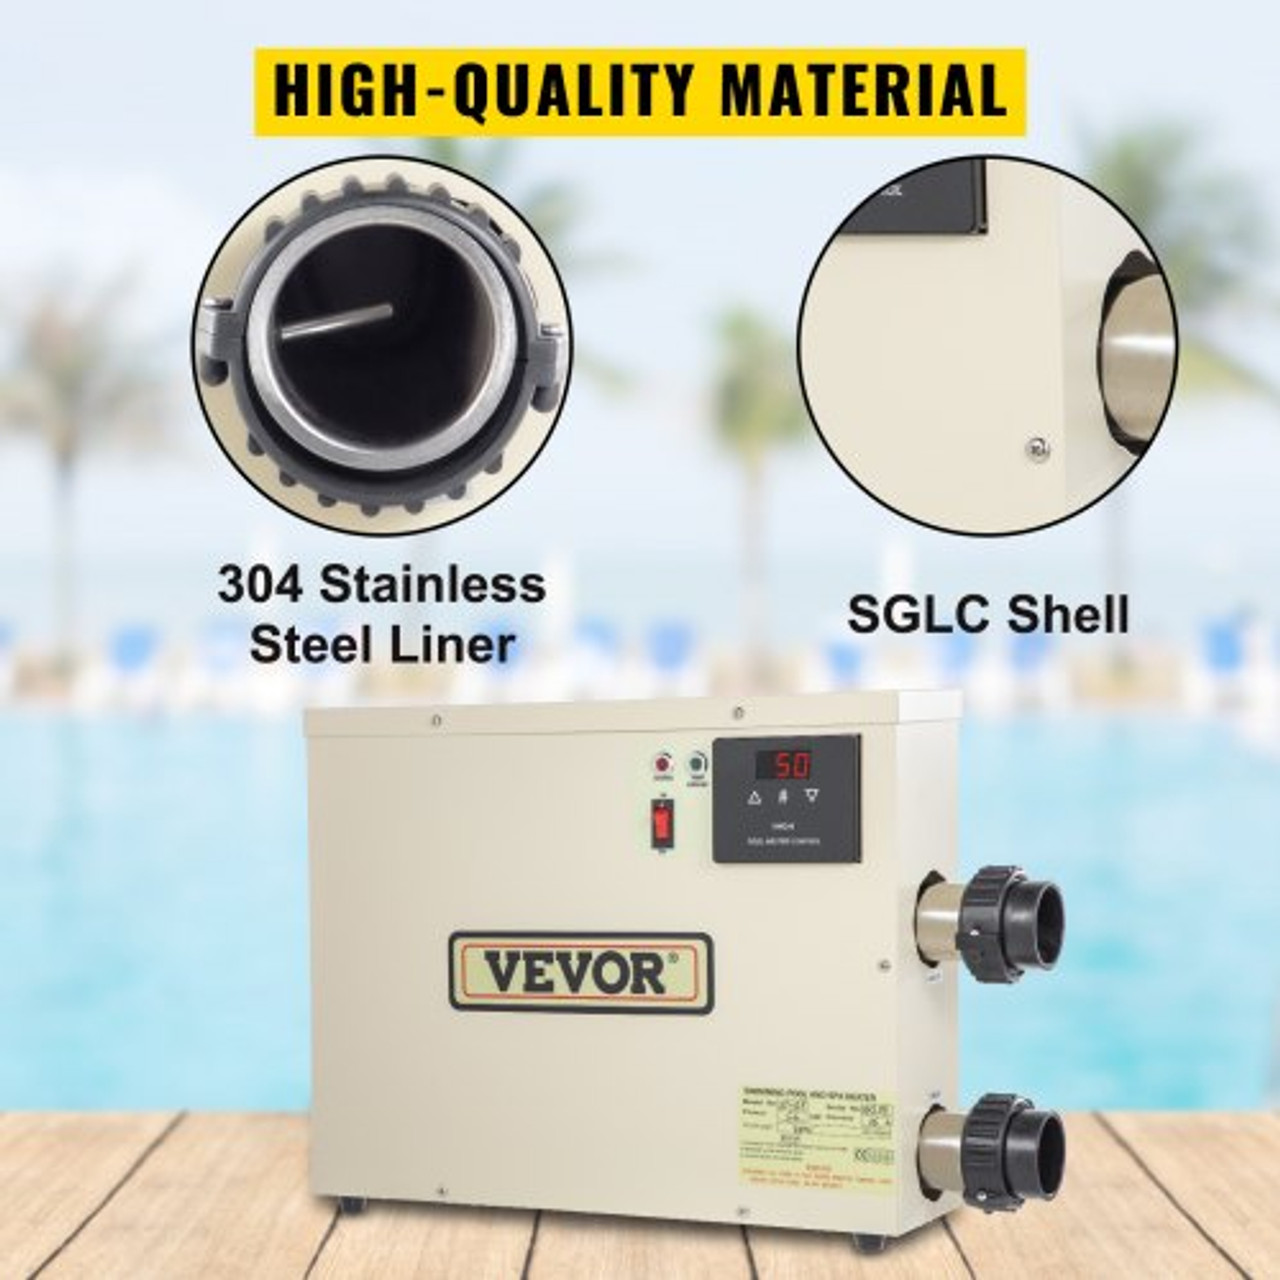 Electric SPA Heater 15KW 240V 50-60HZ Digital SPA Water Heater with Adjustable Temperature Controller Heater for Swimming Pool and Hot Bathtubs Self Modulating Pool SPA Heater with CE